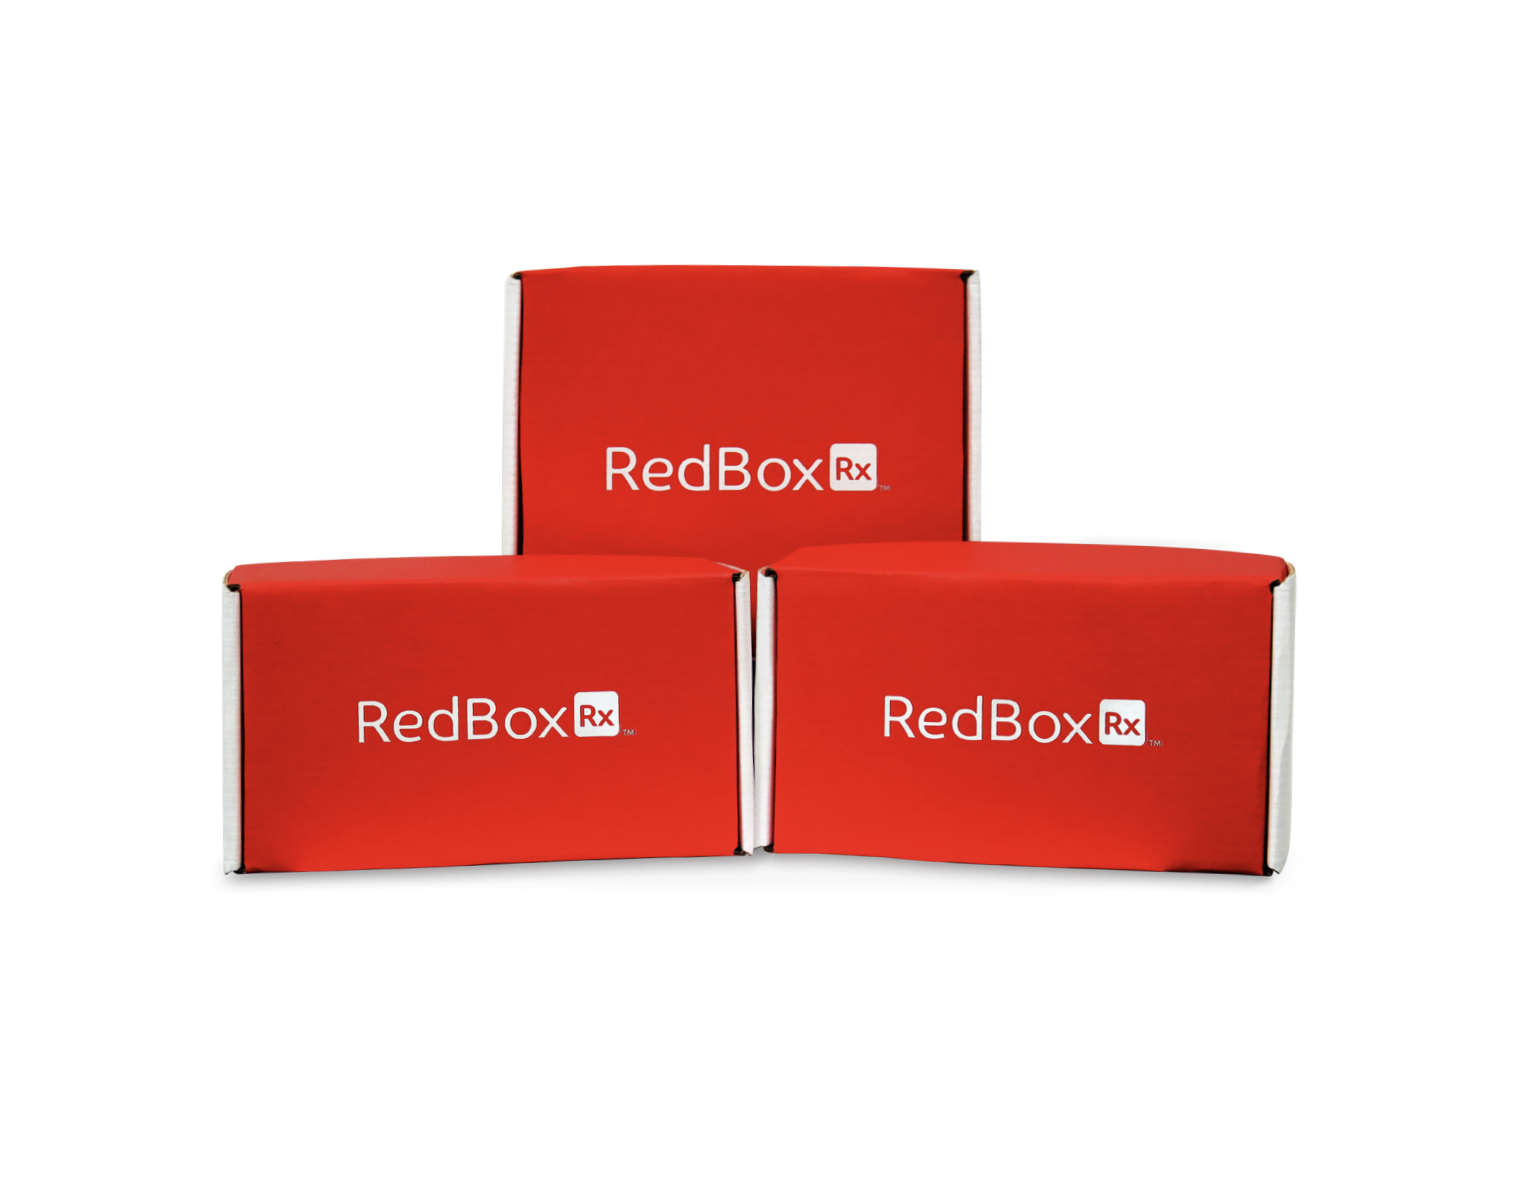 Hy-Vee Announces the Launch of New Subsidiary RedBox Rx